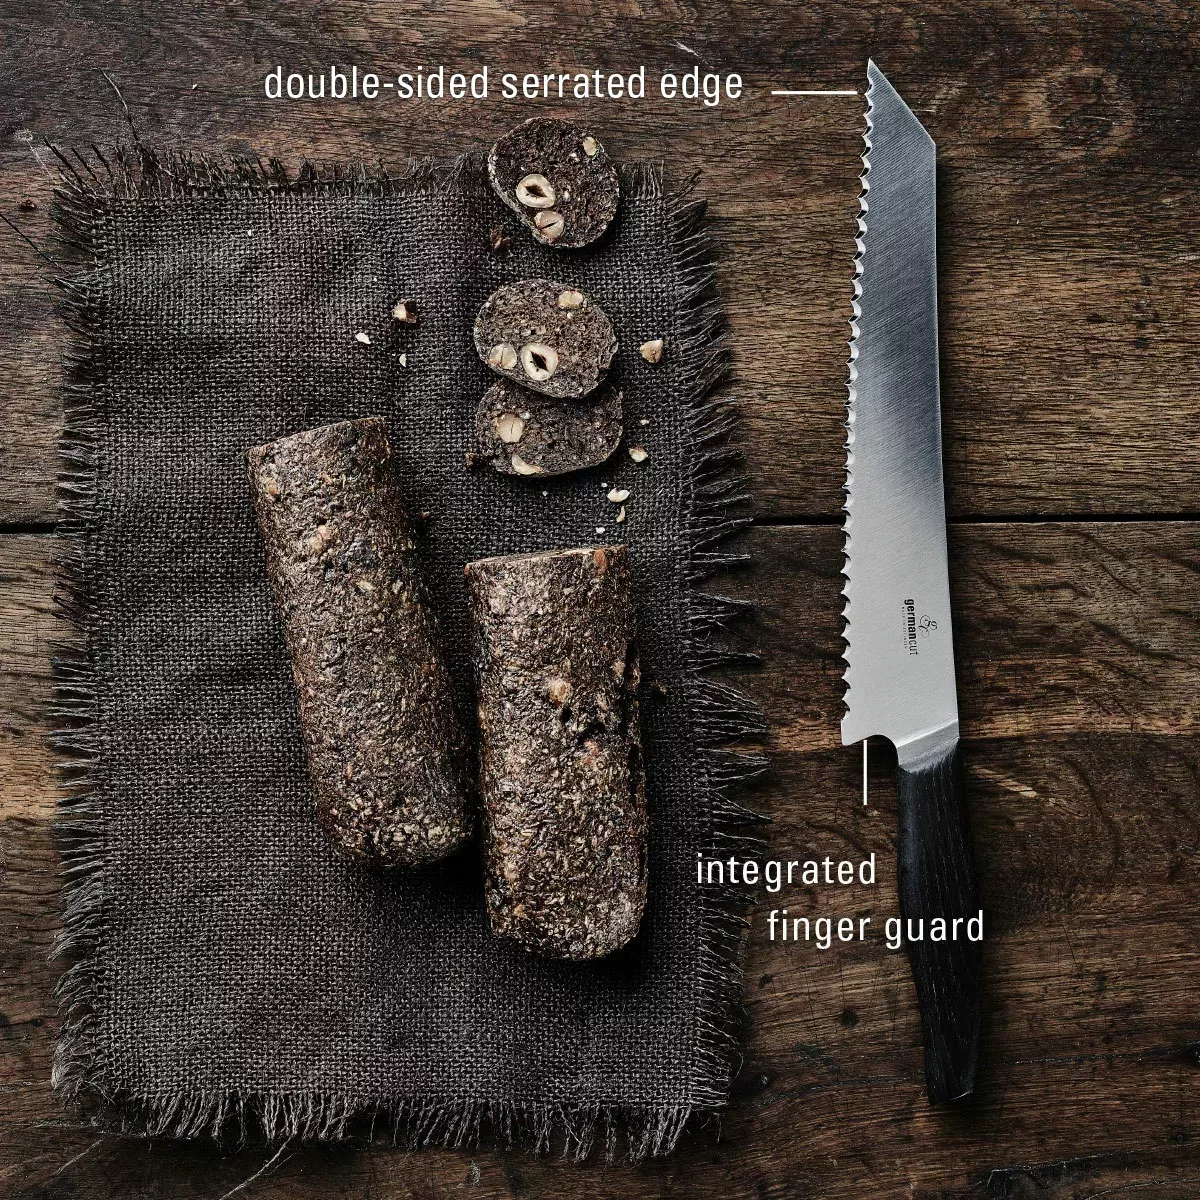 Breadlover - double-sided serrated edge